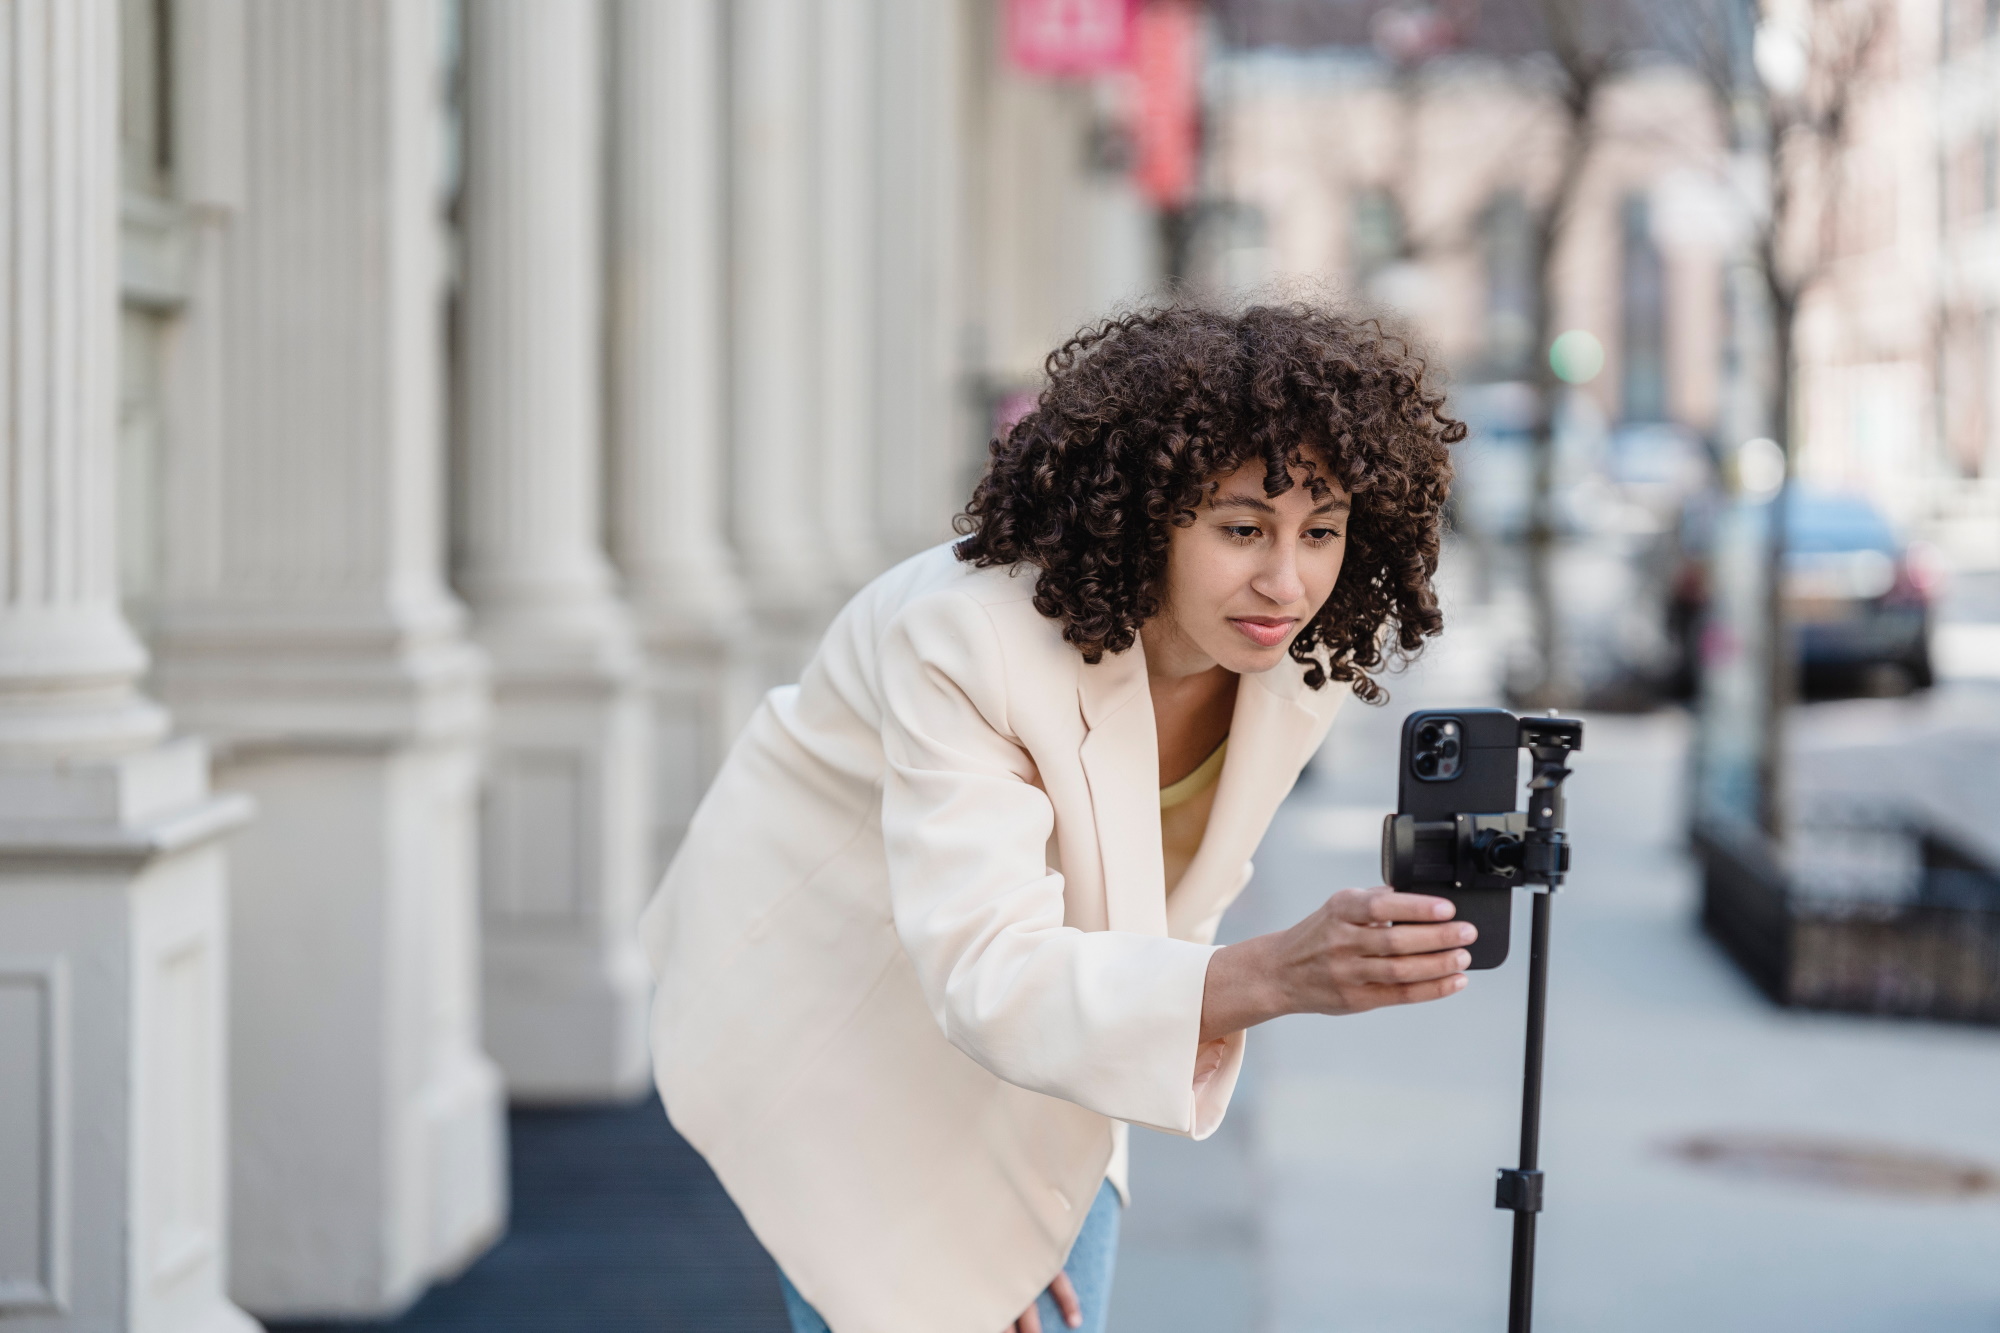 female wearing blazer setting up phone to film on phone stand outdoors